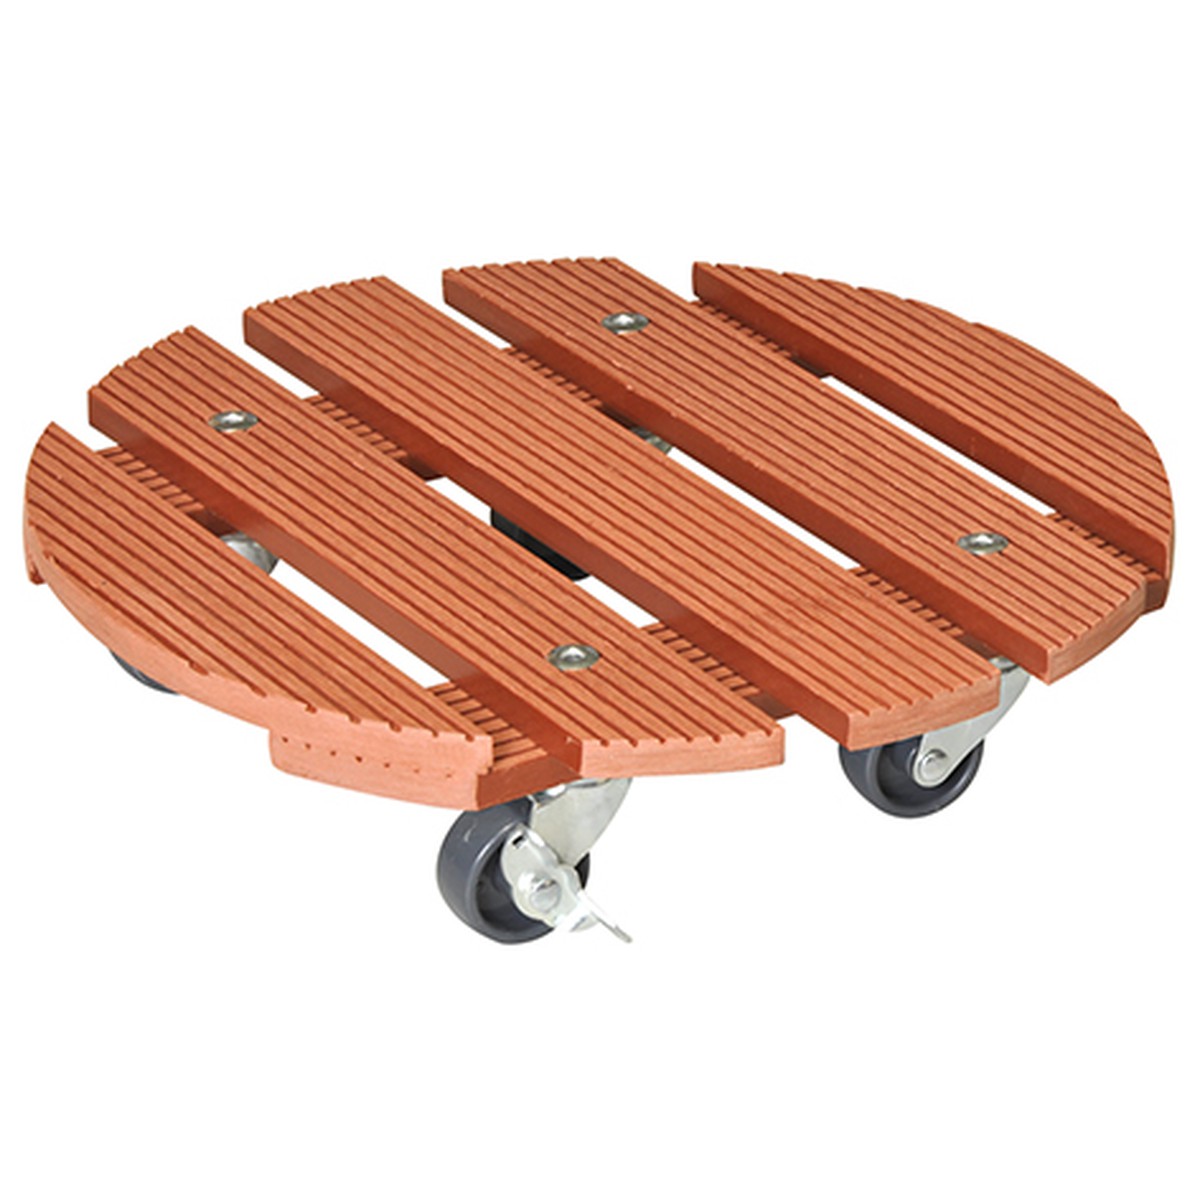   Chariot Multi Wpc GH 0535  D290mm Sup 100kg